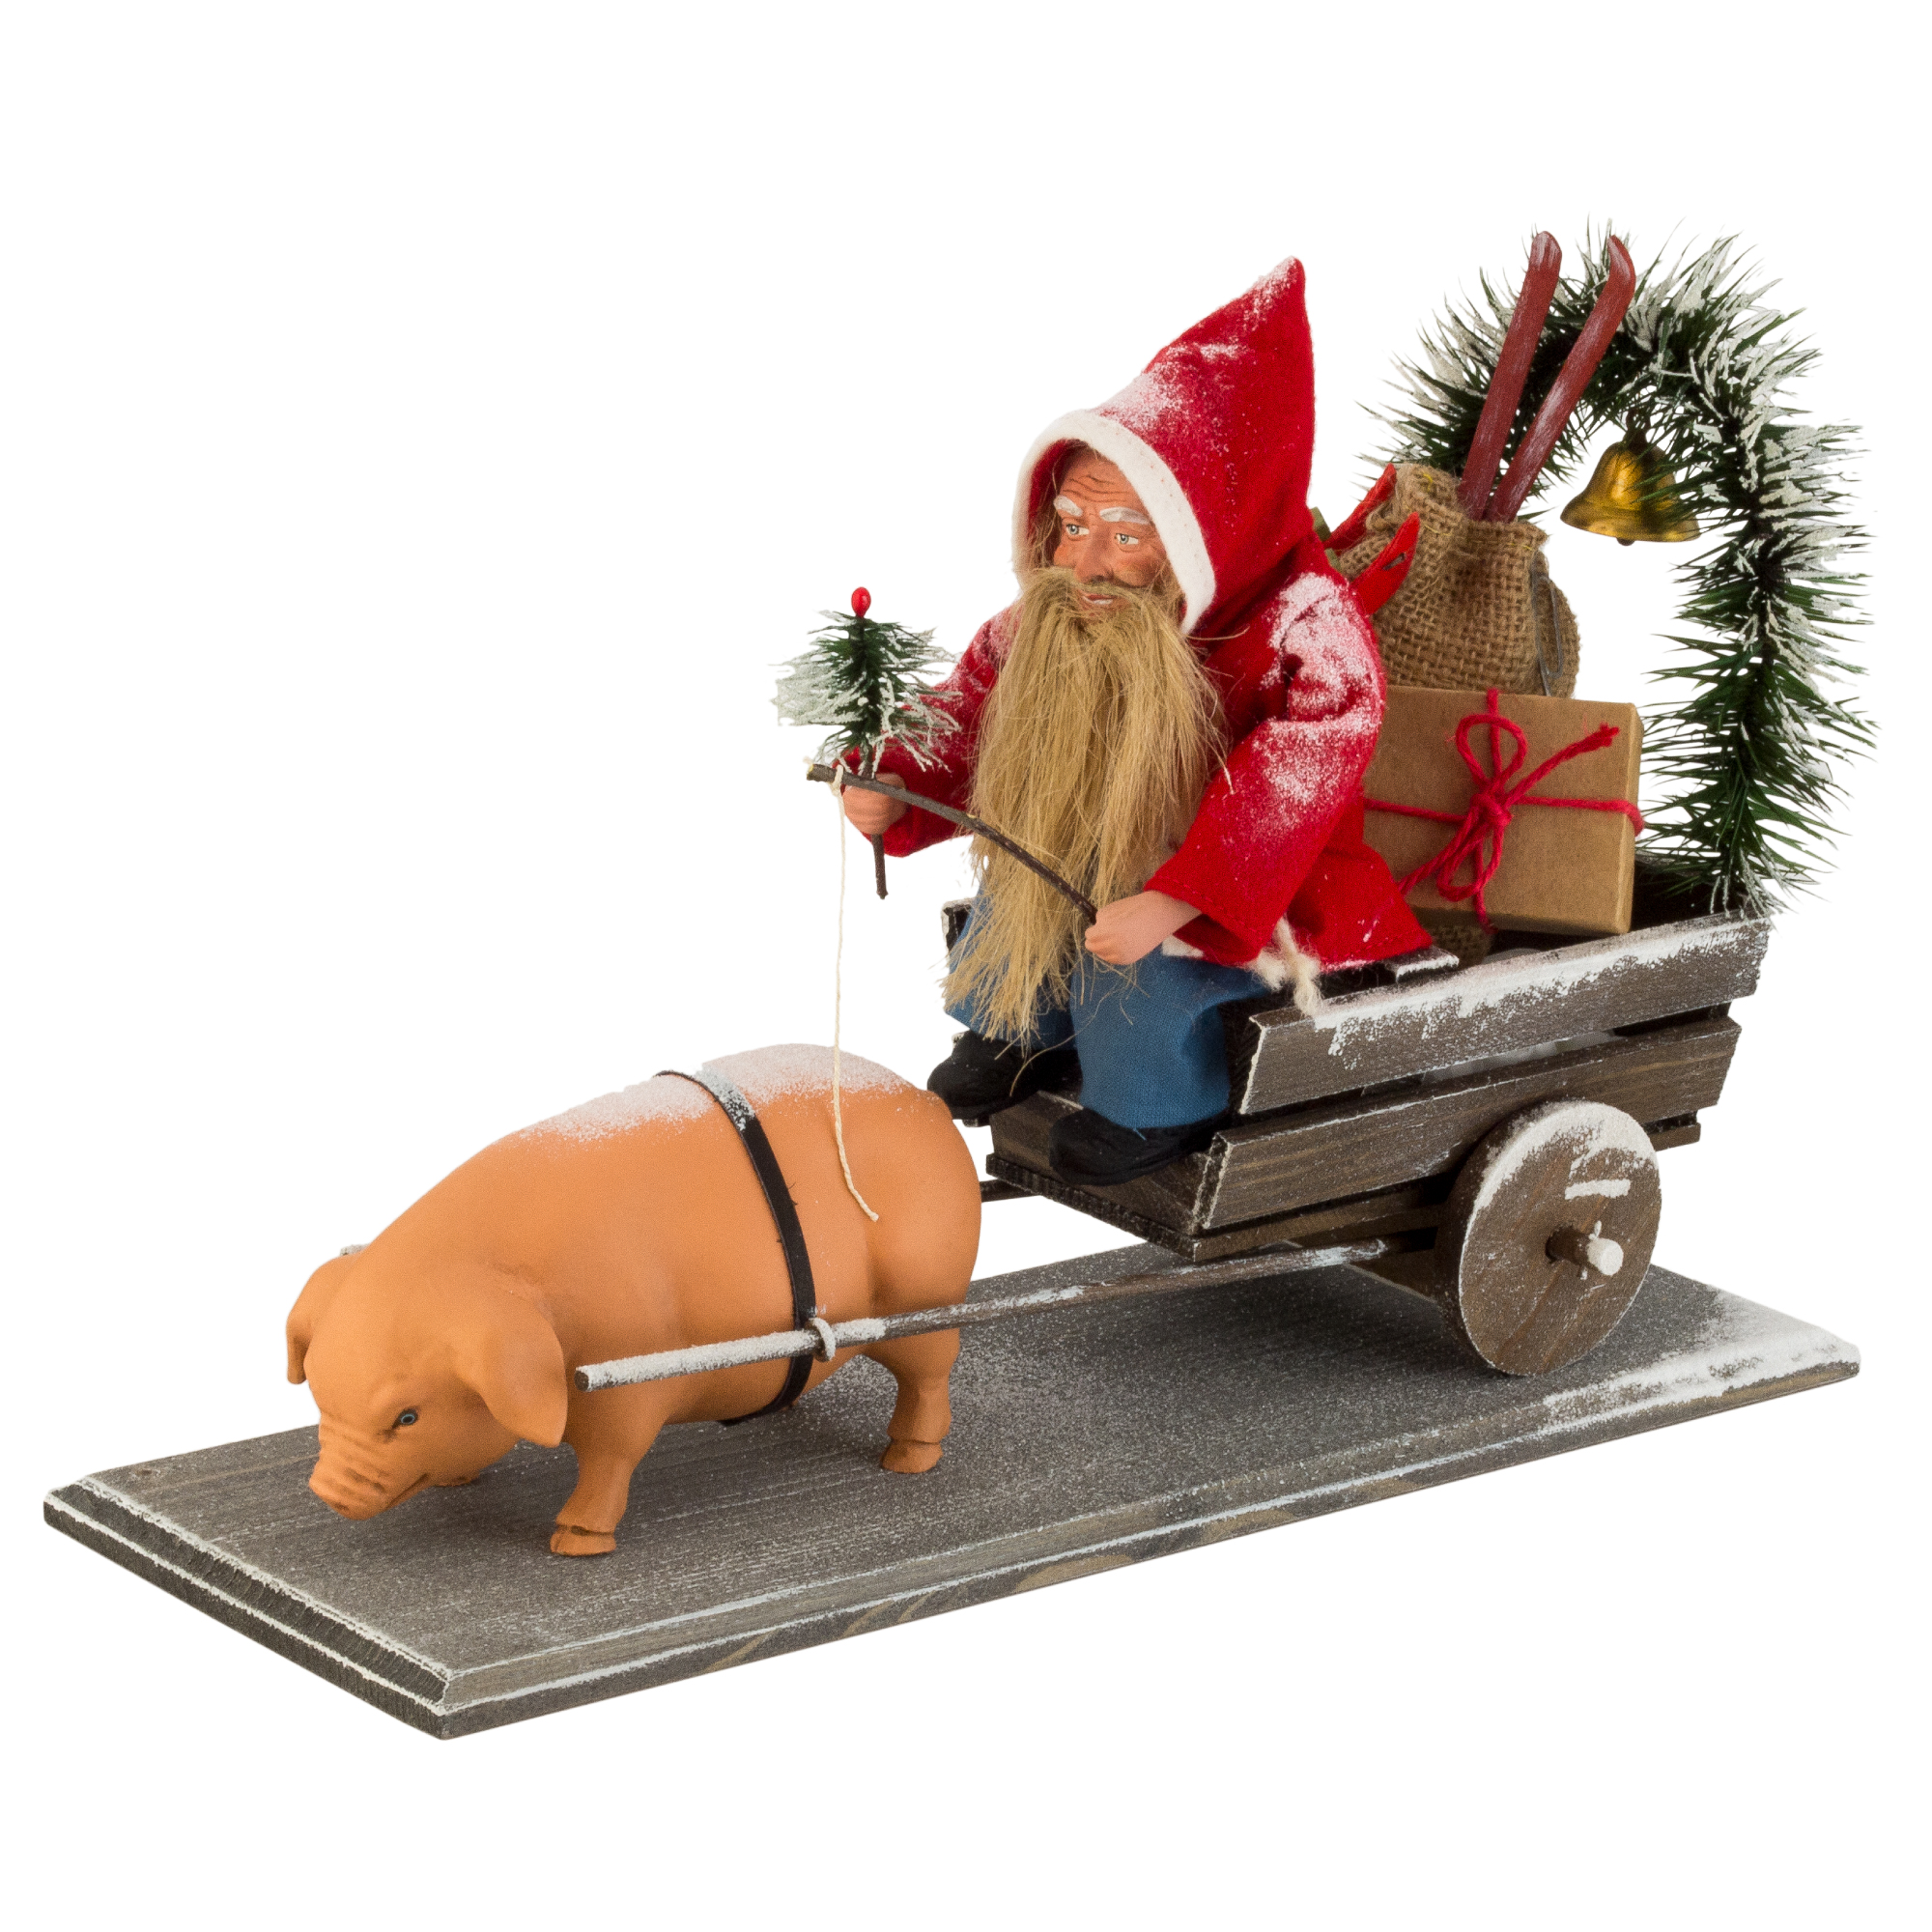 Christmas cart with lucky pig